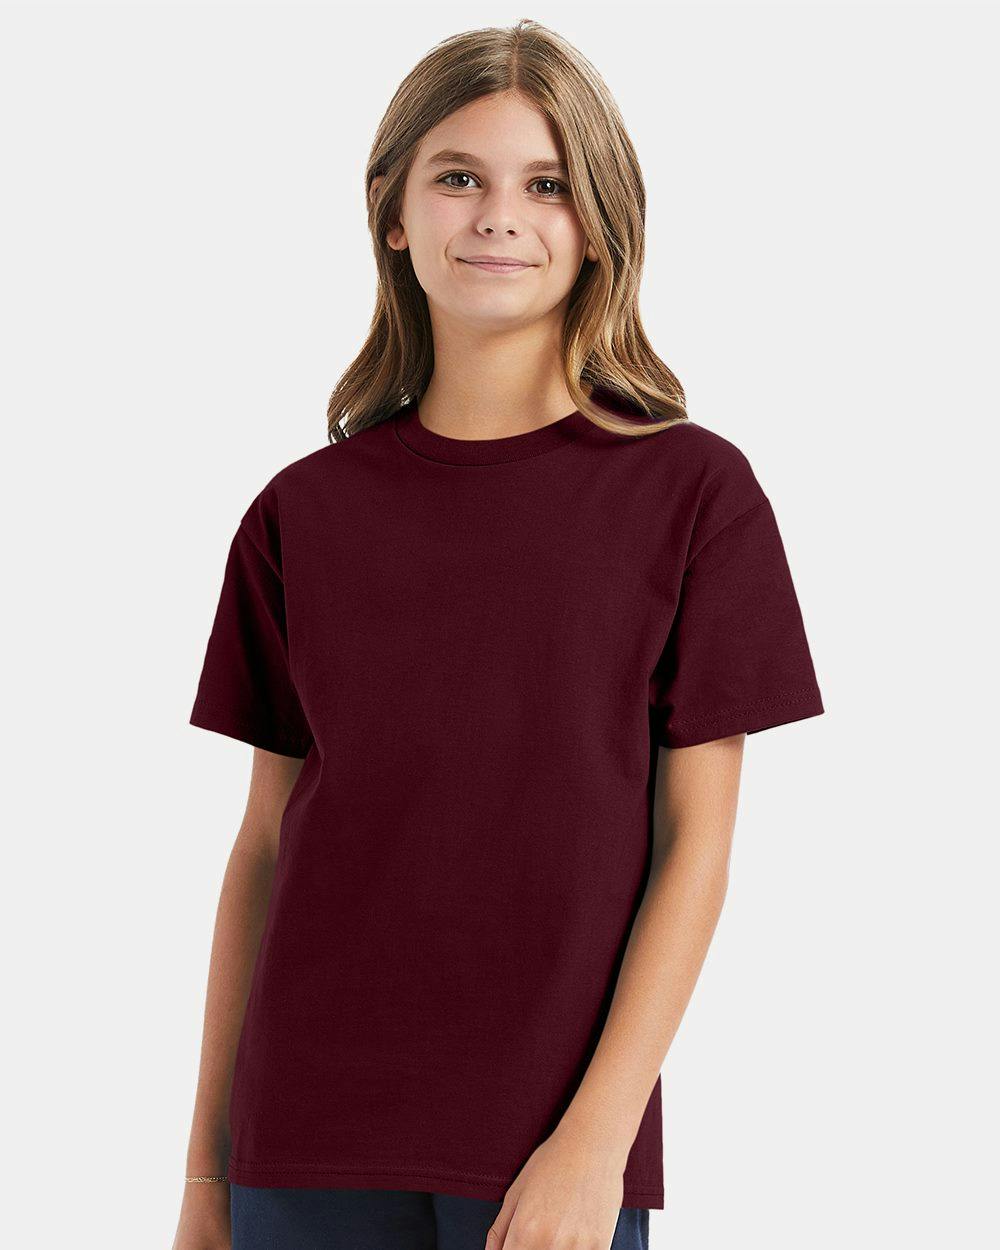 Image for Authentic Youth T-Shirt - 5450